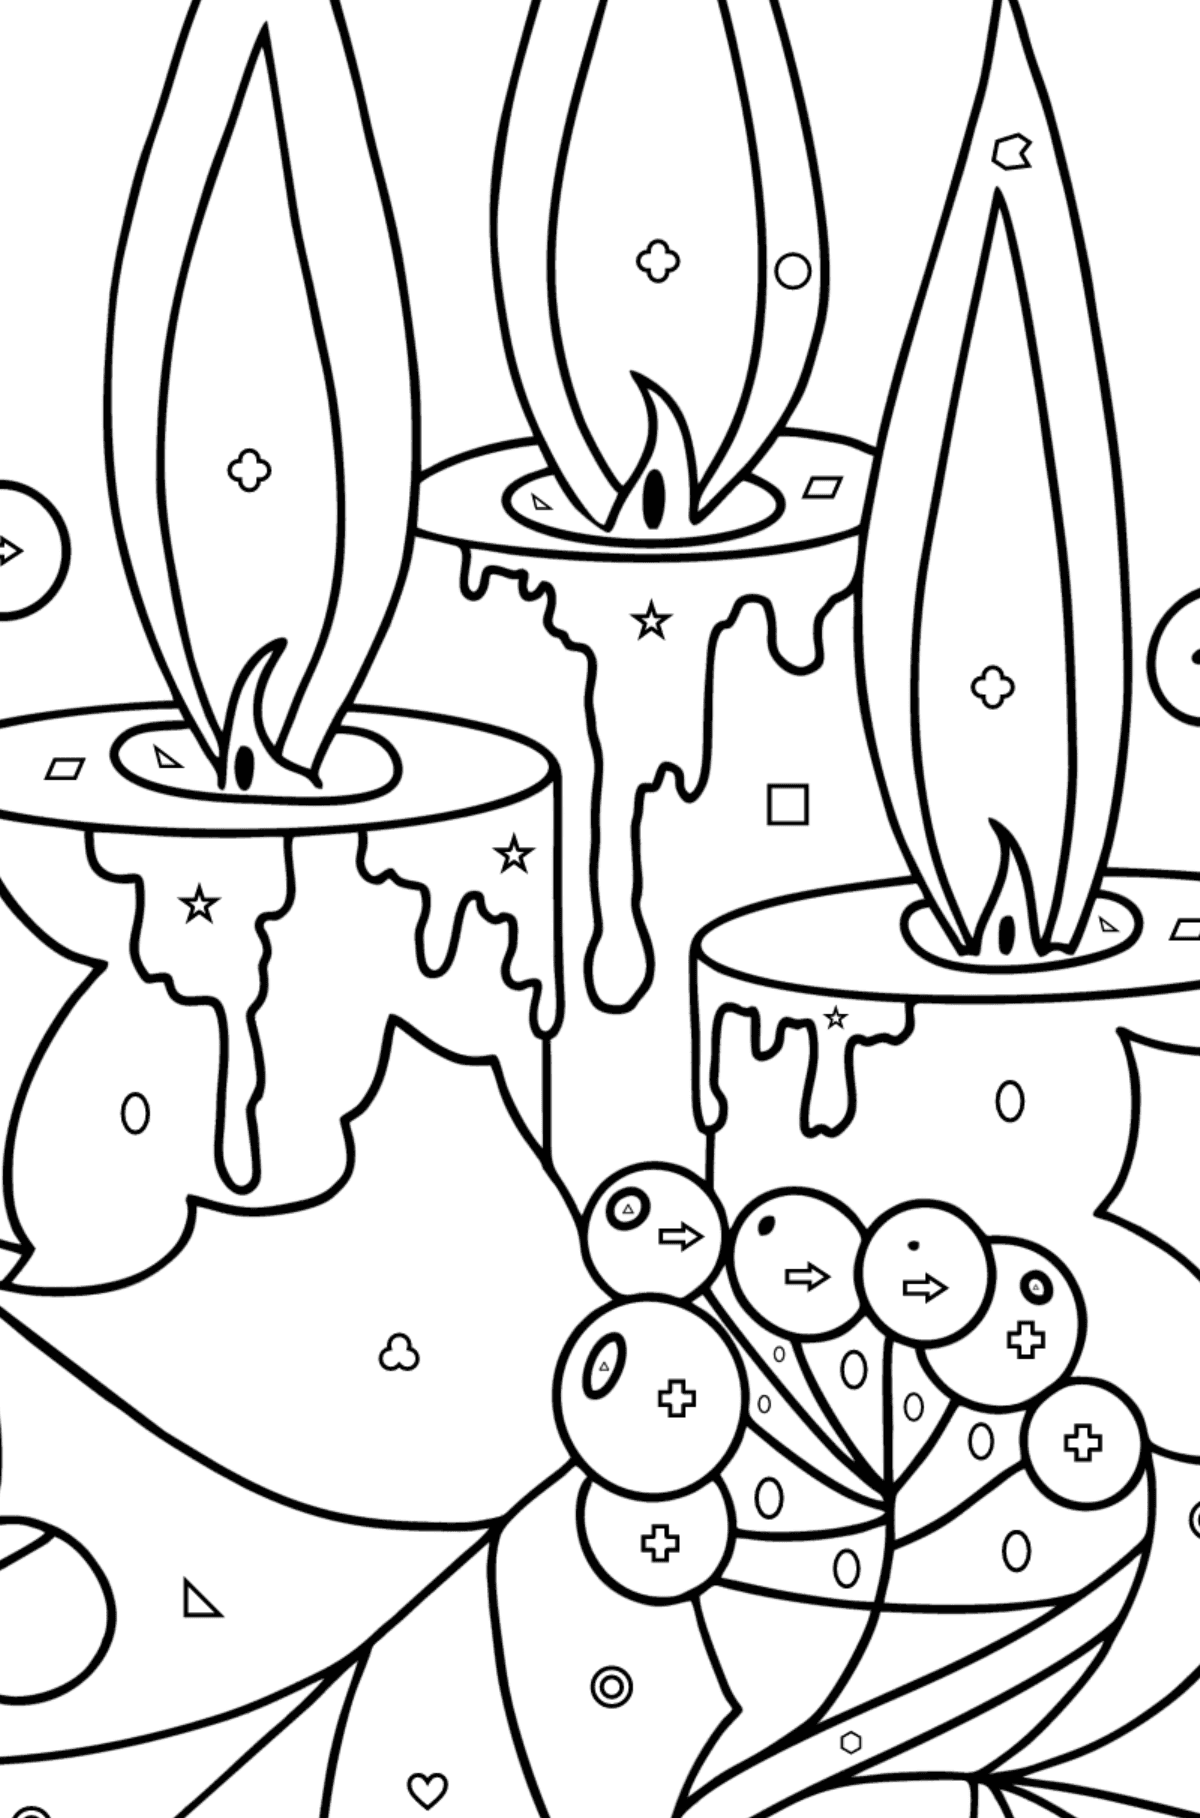 Christmas candles - Christmas coloring pages online and printable